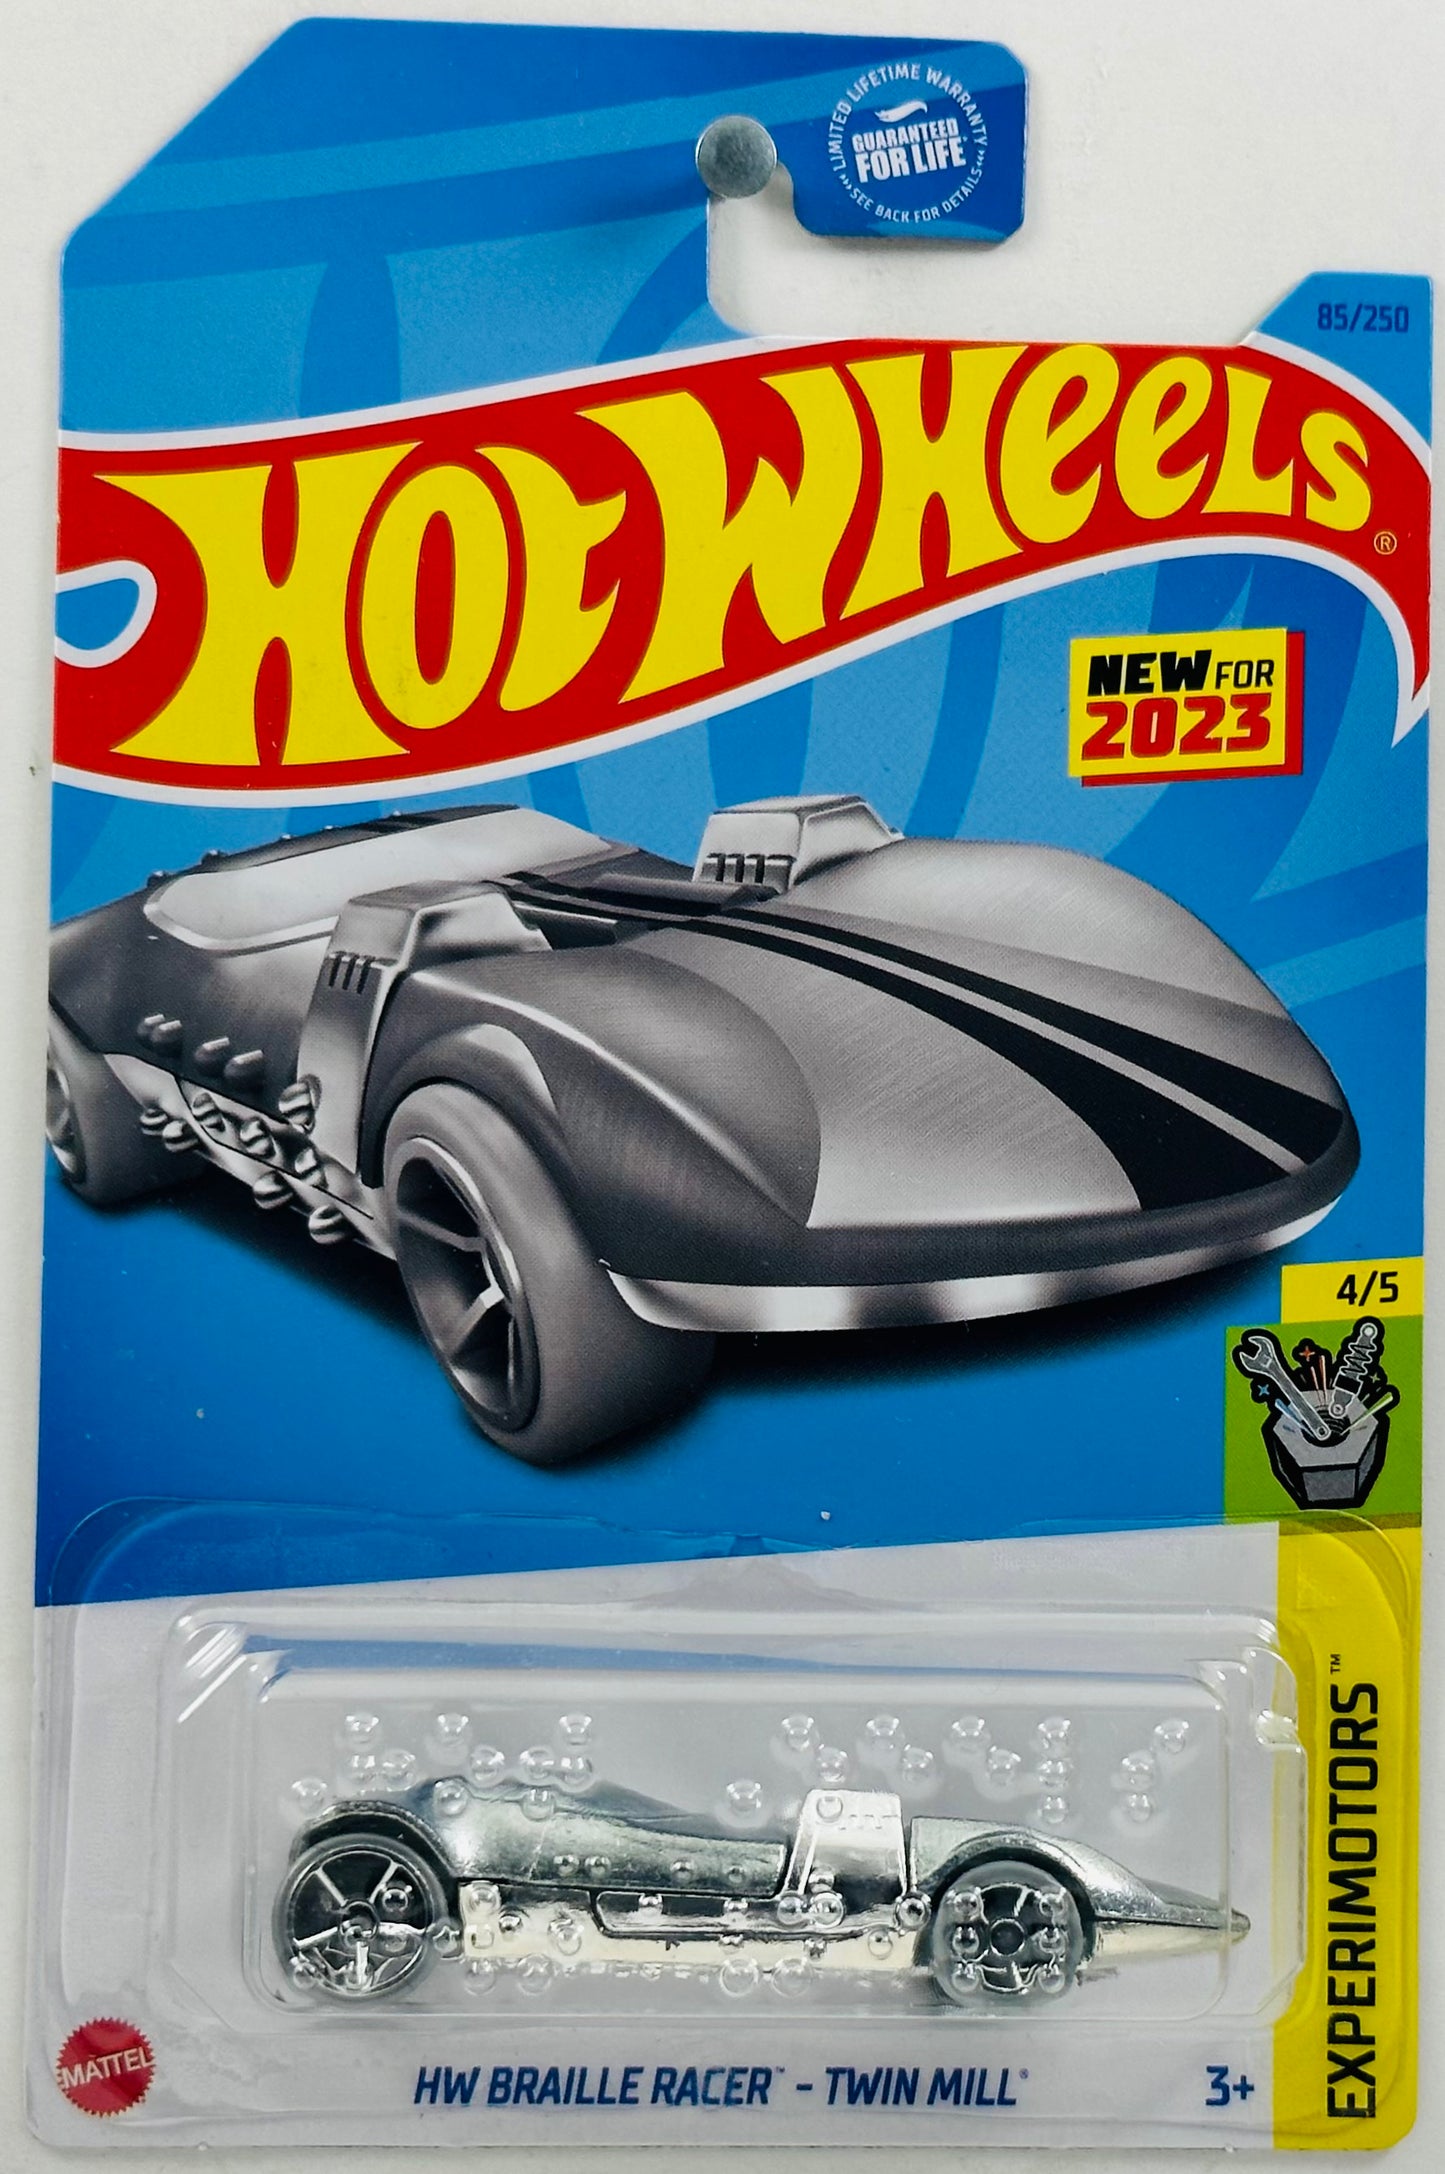 Hot Wheels 2023 - Collector # 085/250 - Experimotors 04/05 - New Models - HW Braille Racer - Twin Mill - ZAMAC - Gray Racing Stripes - USA